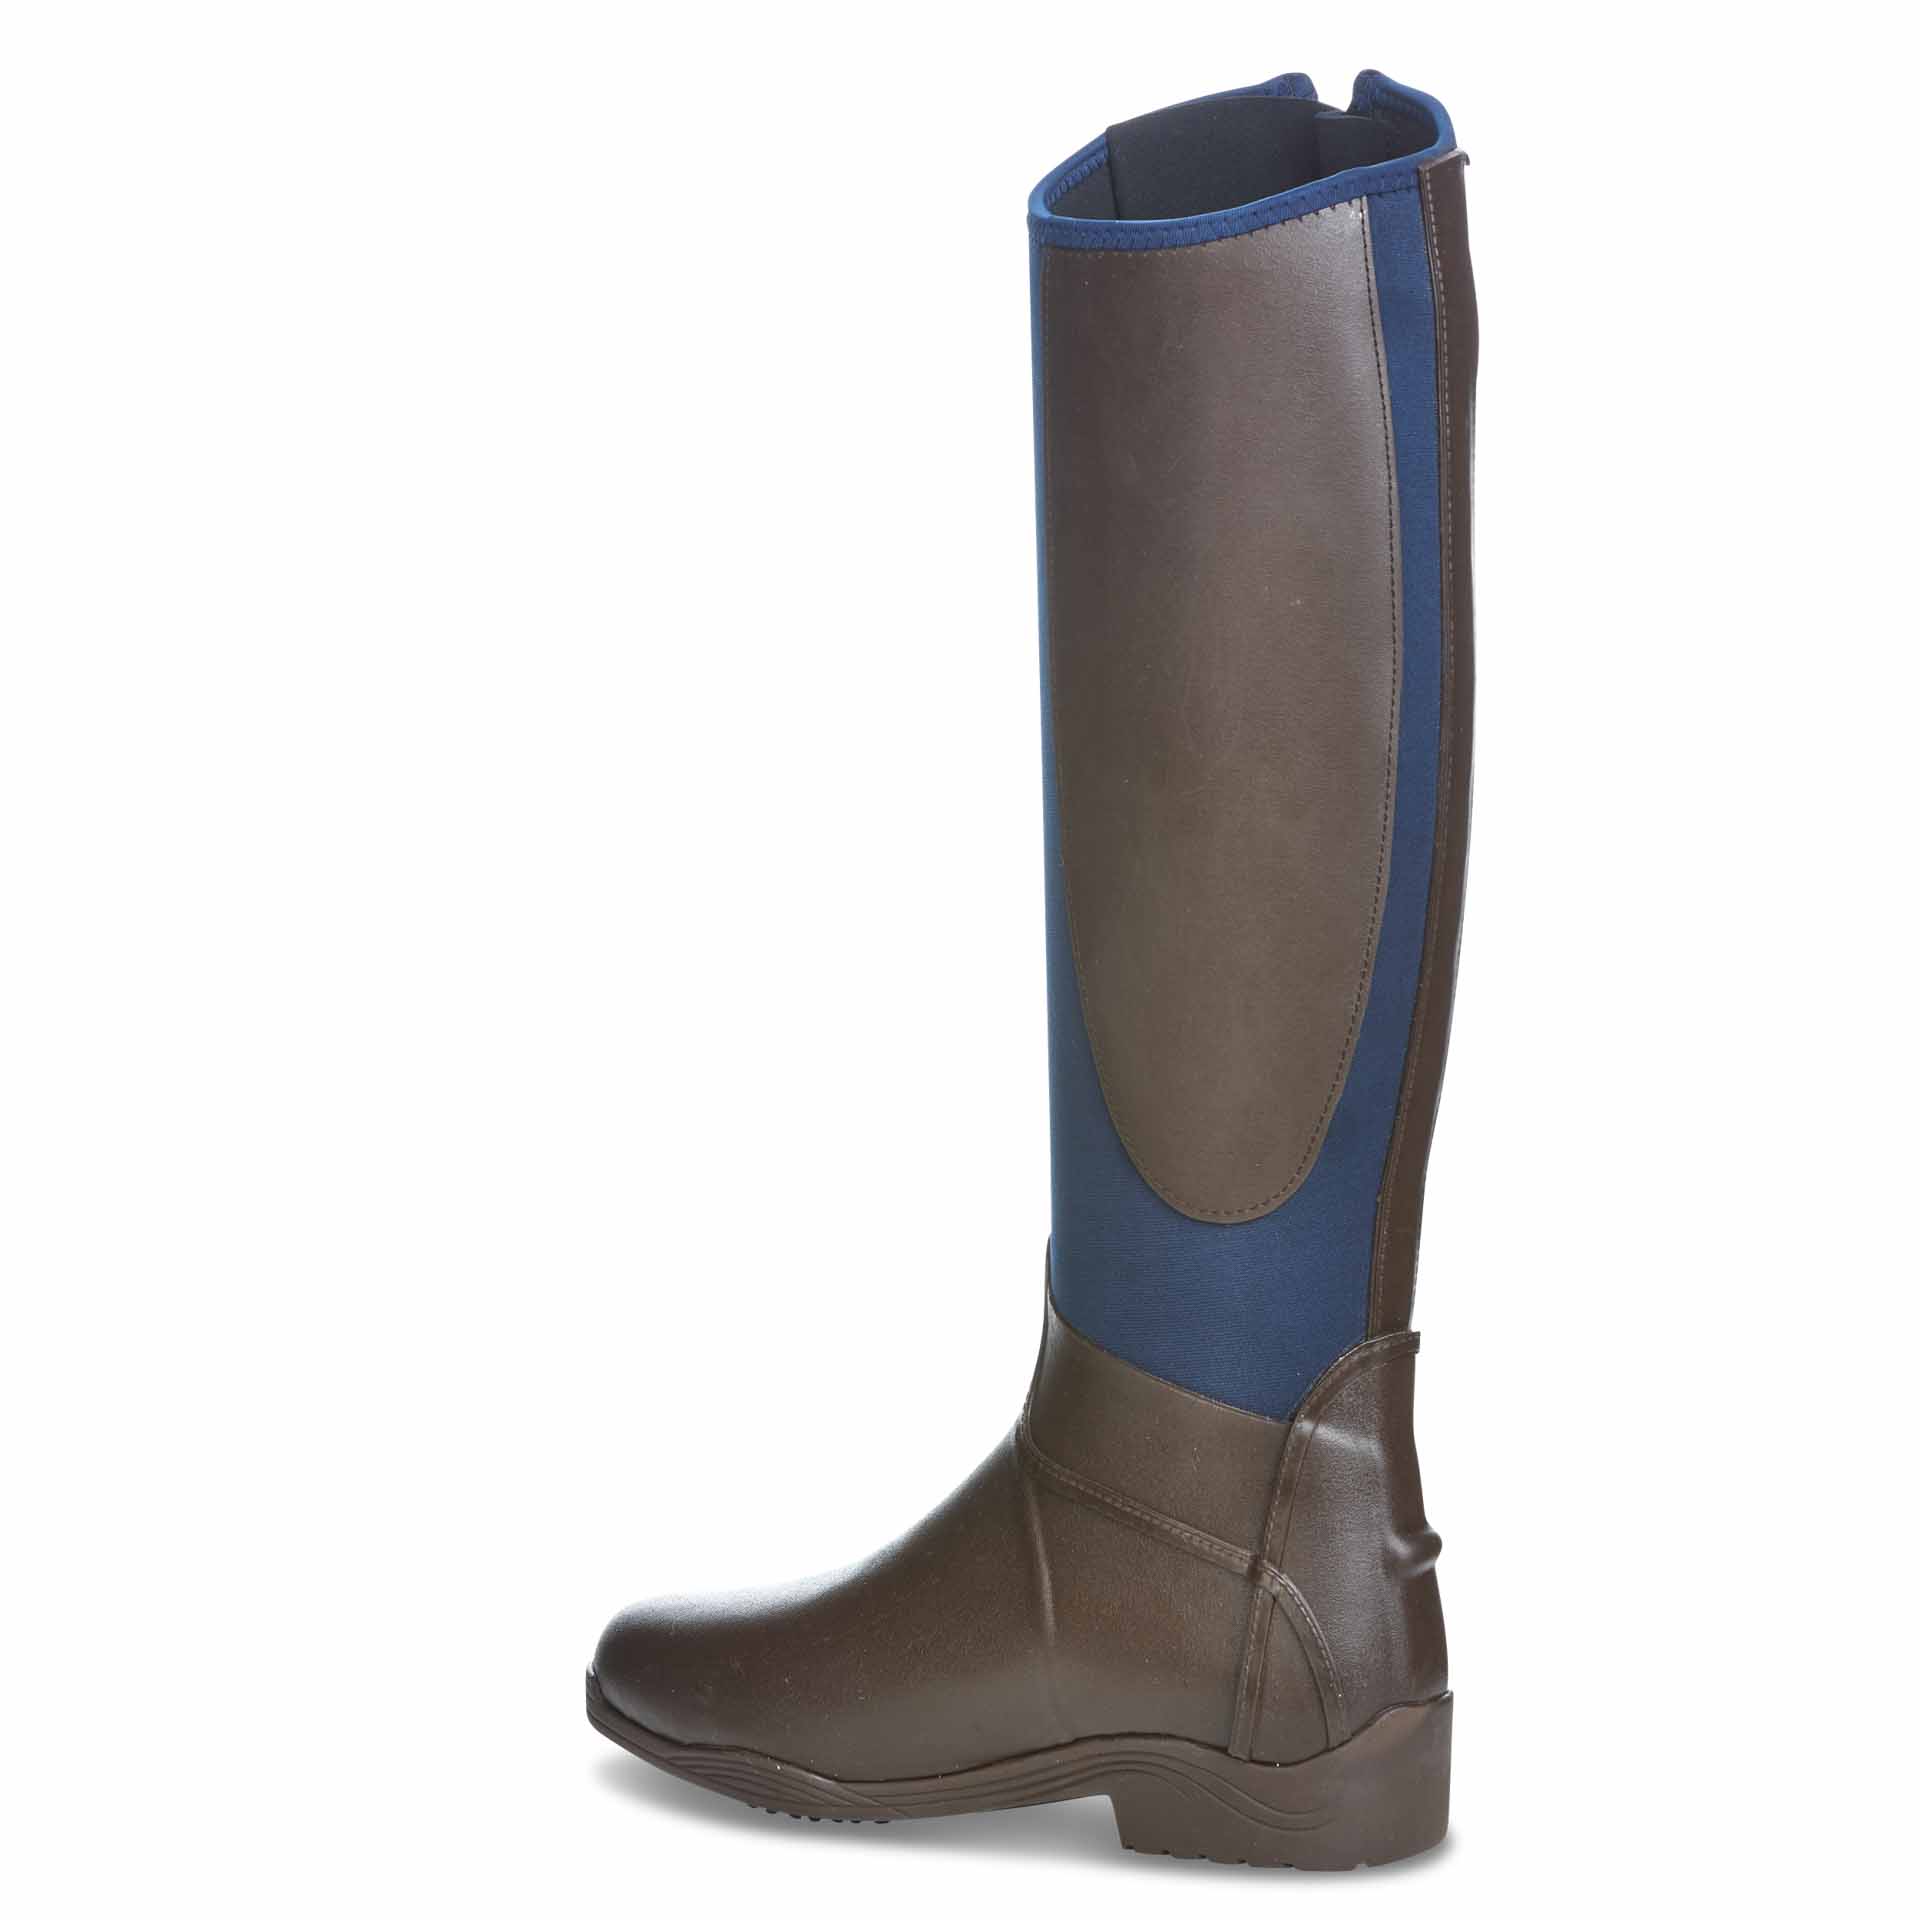 BUSSE Riding Mud Boots CALGARY, brown/navy 36 nn